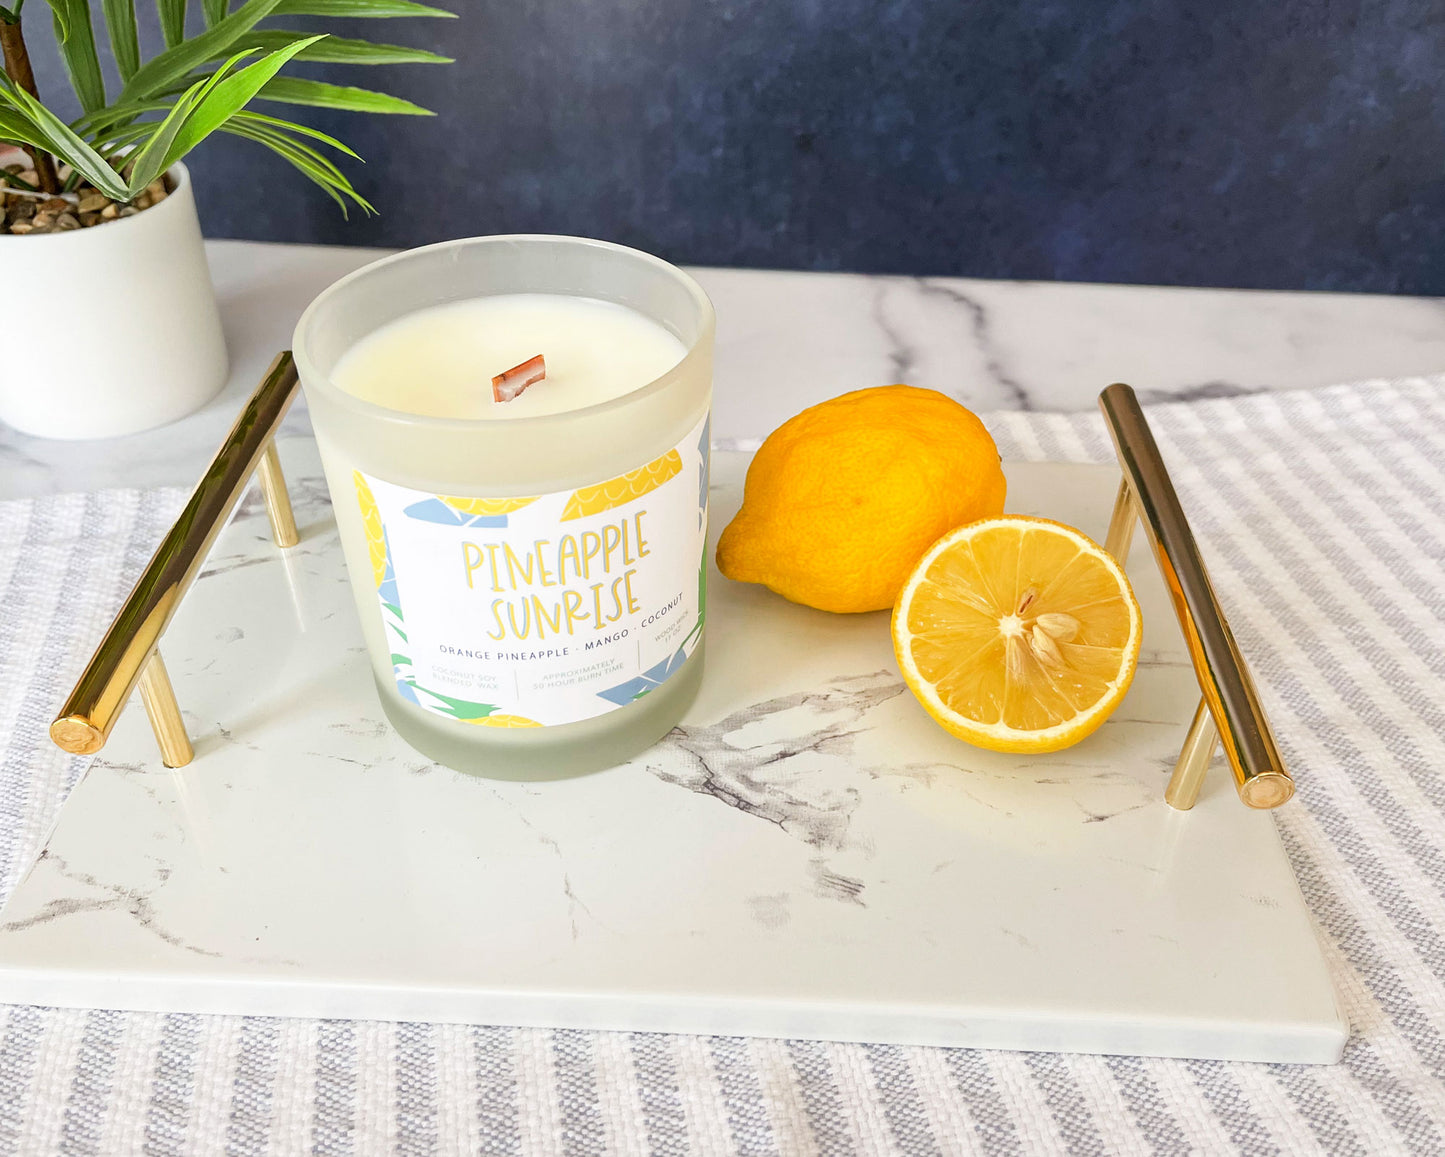 pineapple sunrise candle, orange pineapple mango coconut scent, frosted glass vessel, wood wick, meredith collie paper